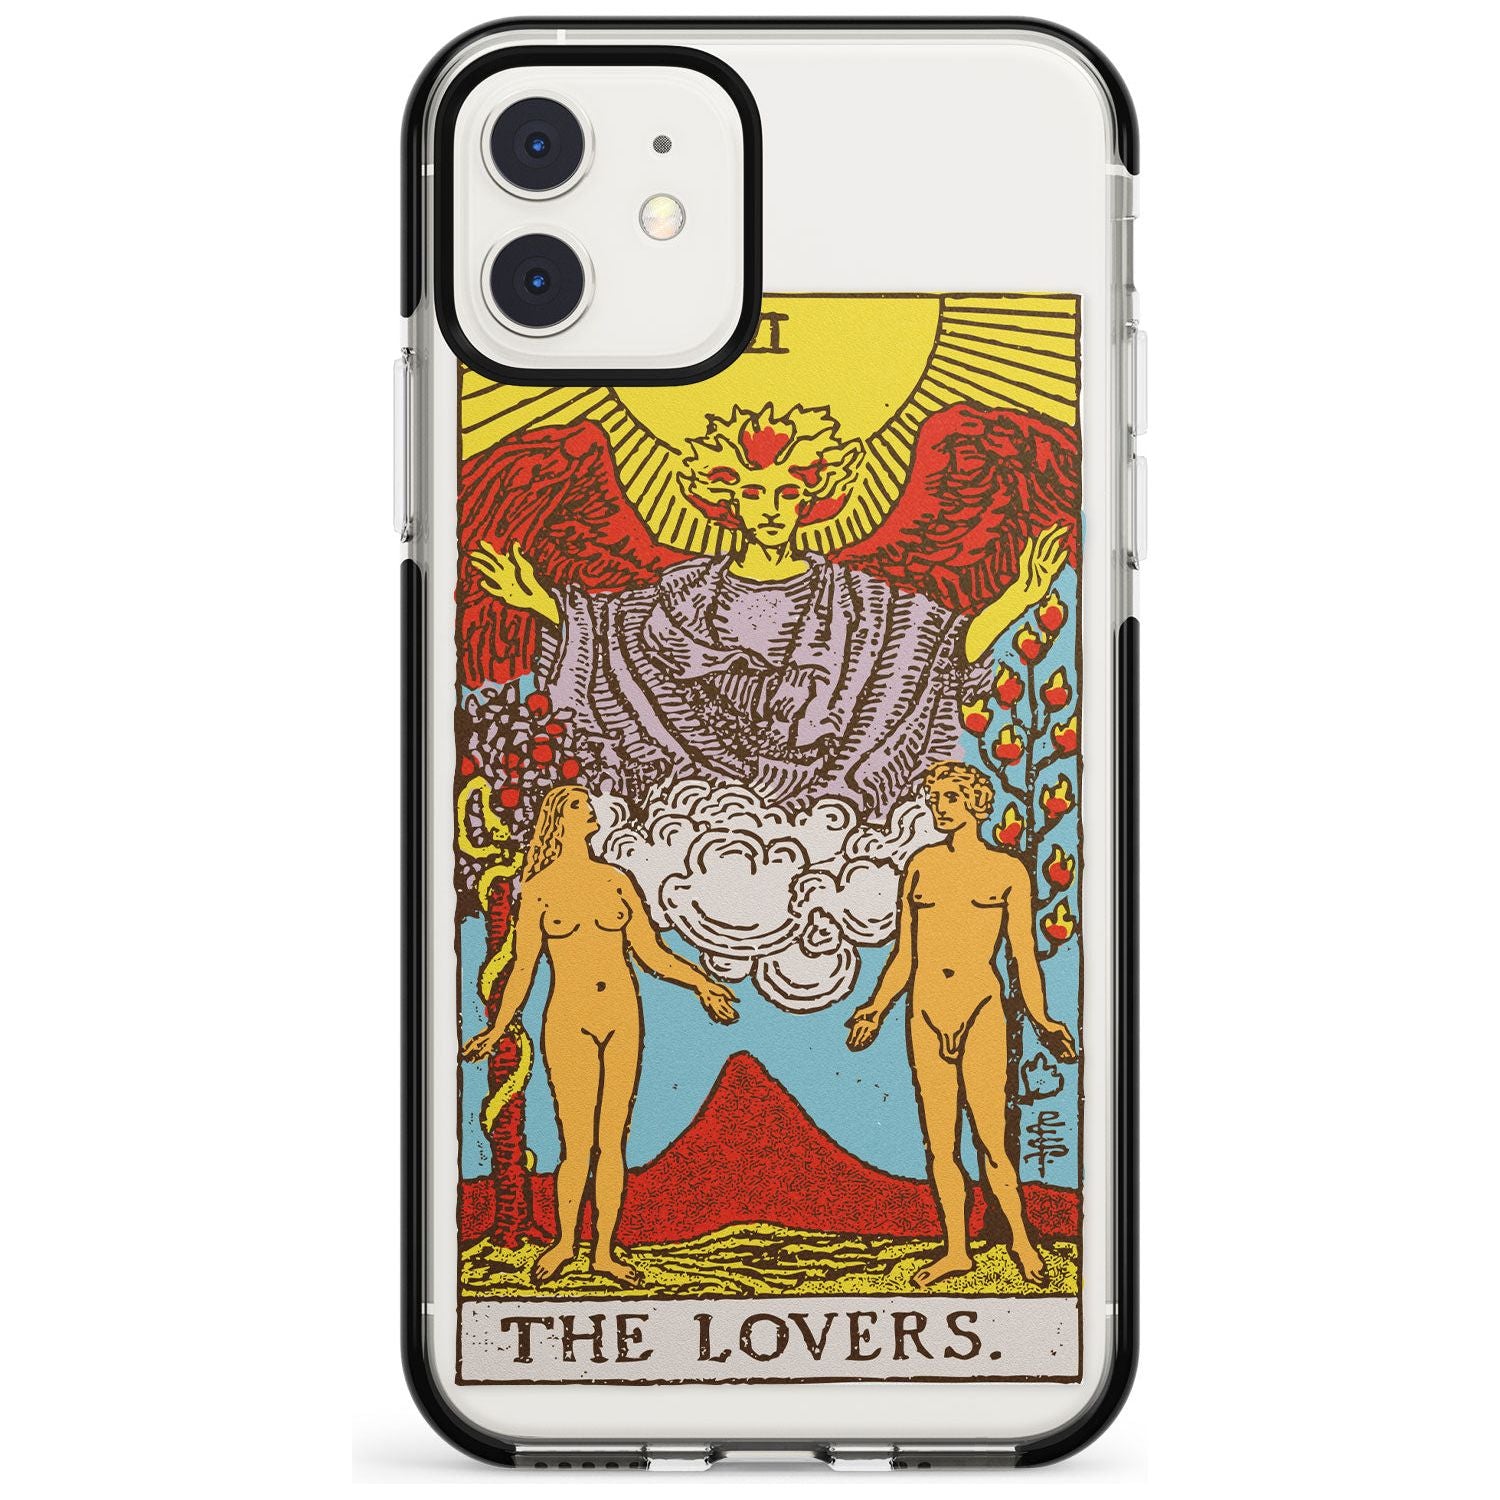 The Lovers Tarot Card - Colour Pink Fade Impact Phone Case for iPhone 11 Pro Max